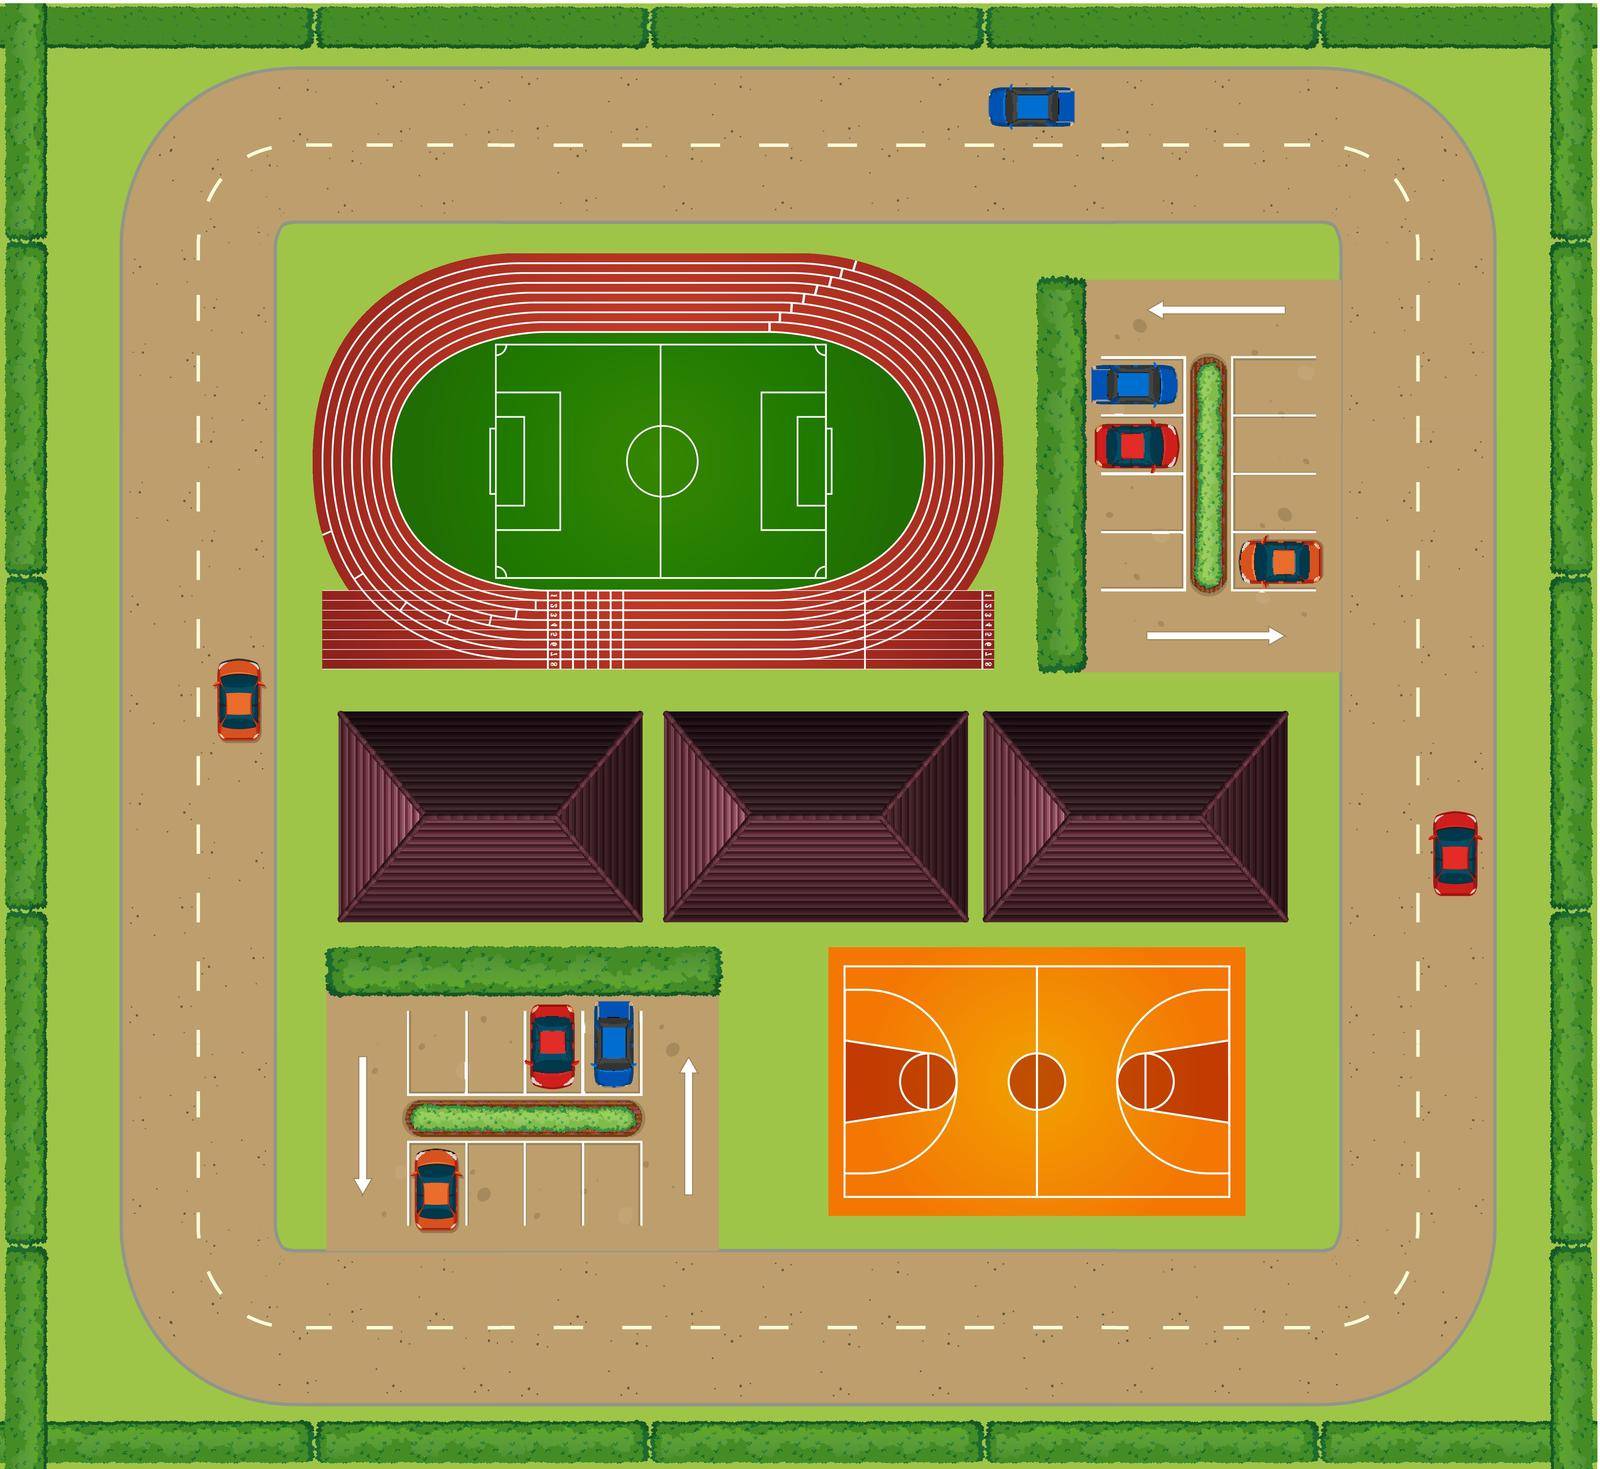 Aerial view of sporting facility illustration